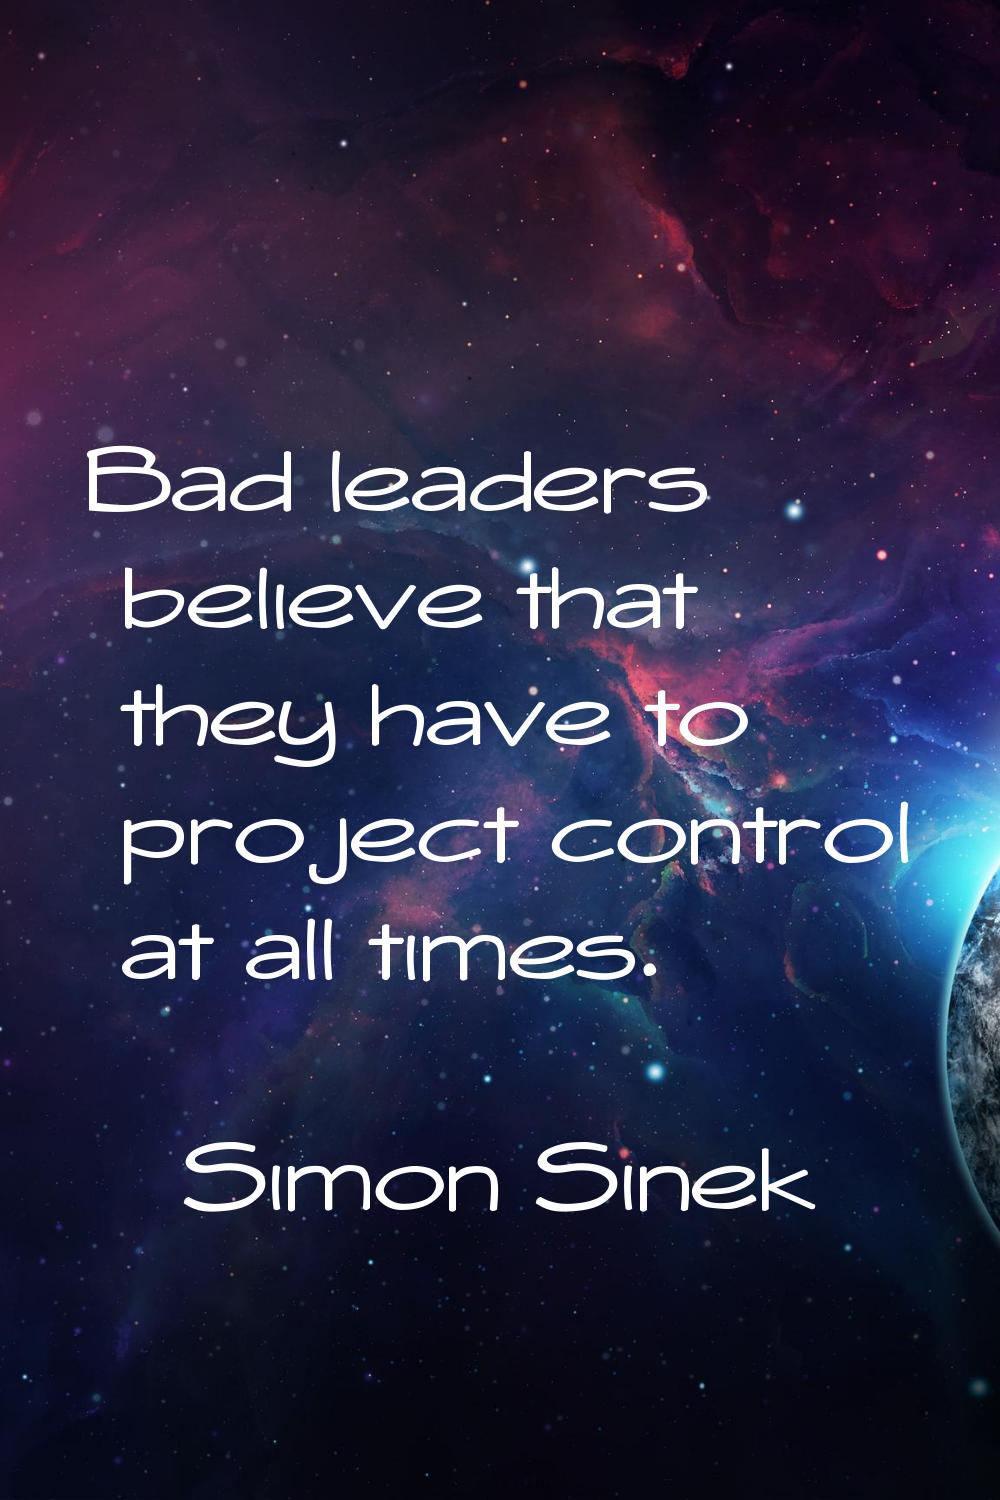 Bad leaders believe that they have to project control at all times.